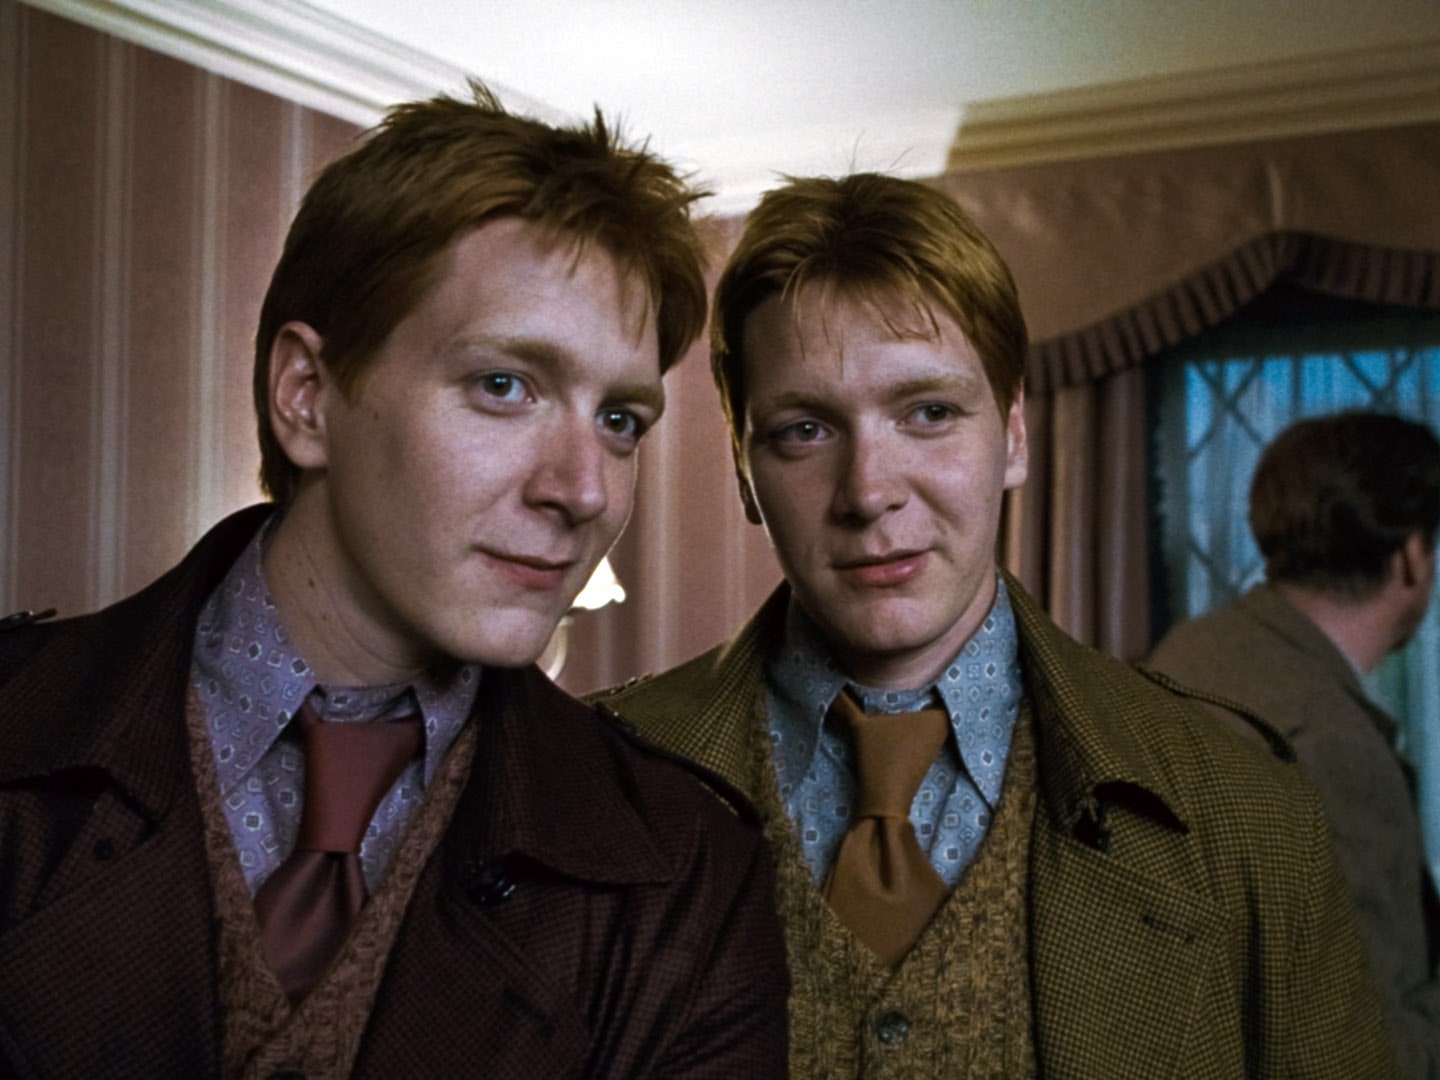 Who portrayed Fred and George Weasley in the Harry Potter movies?